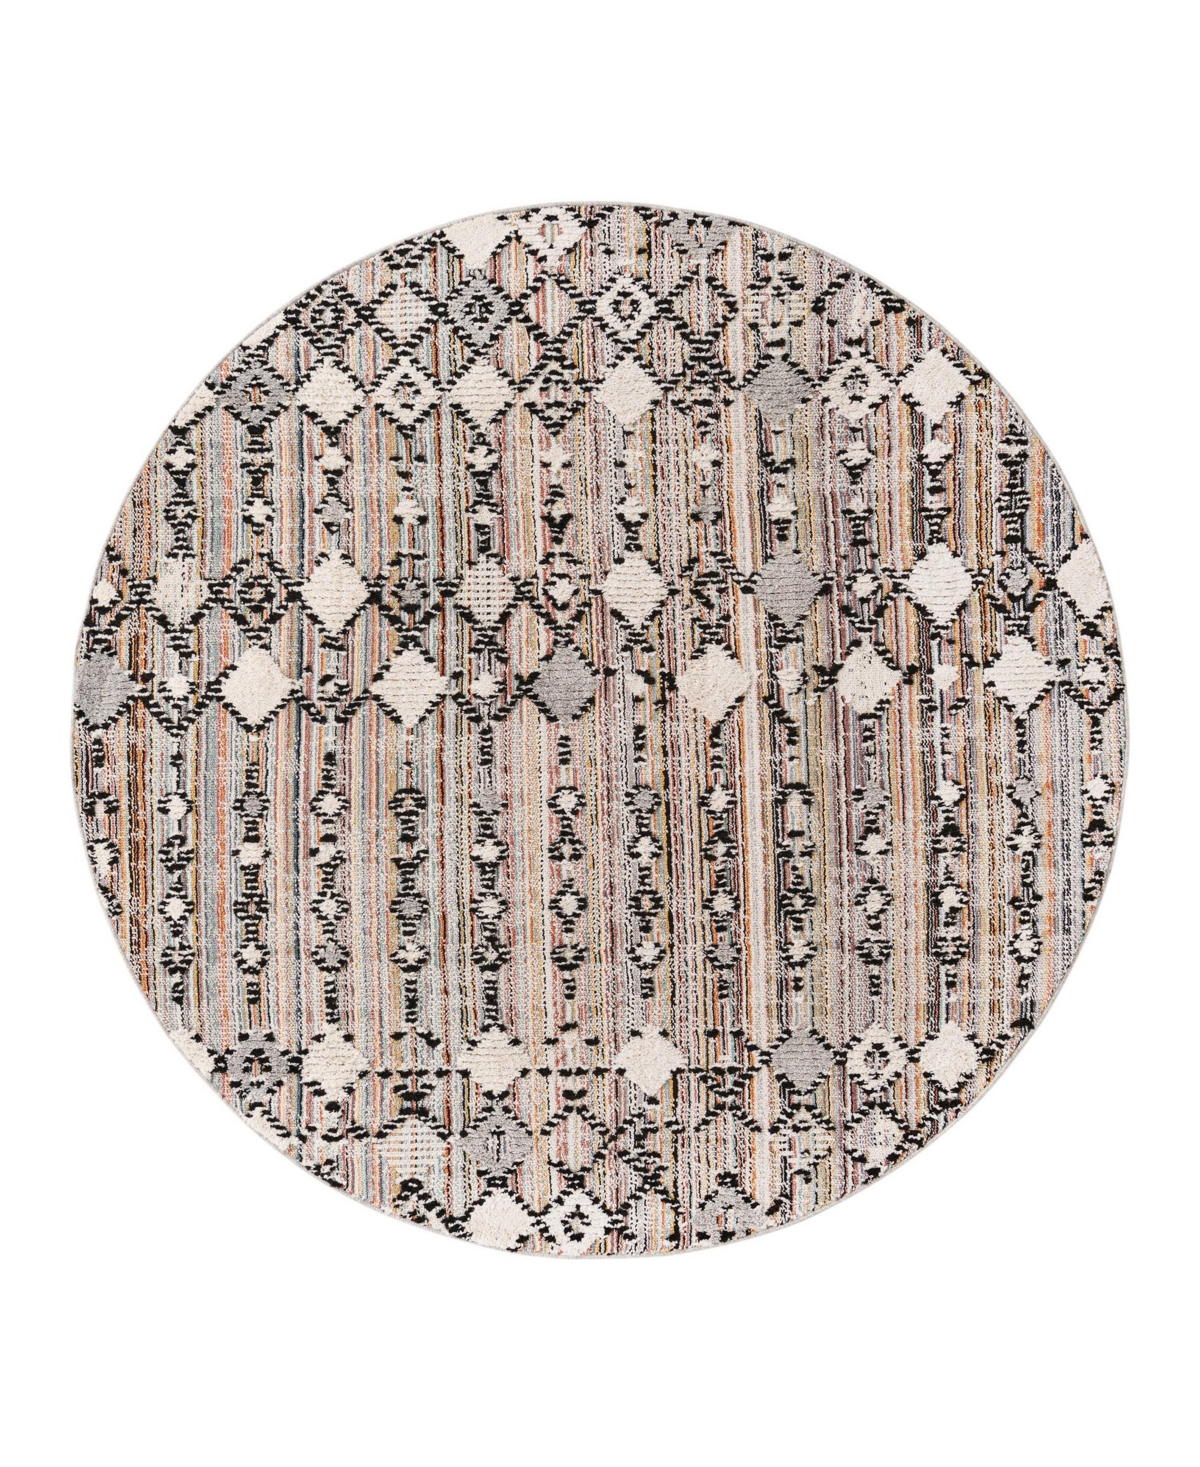 Bayshore Home High-low Pile Upland Upl02 7' X 7' Round Area Rug In Rust,multi